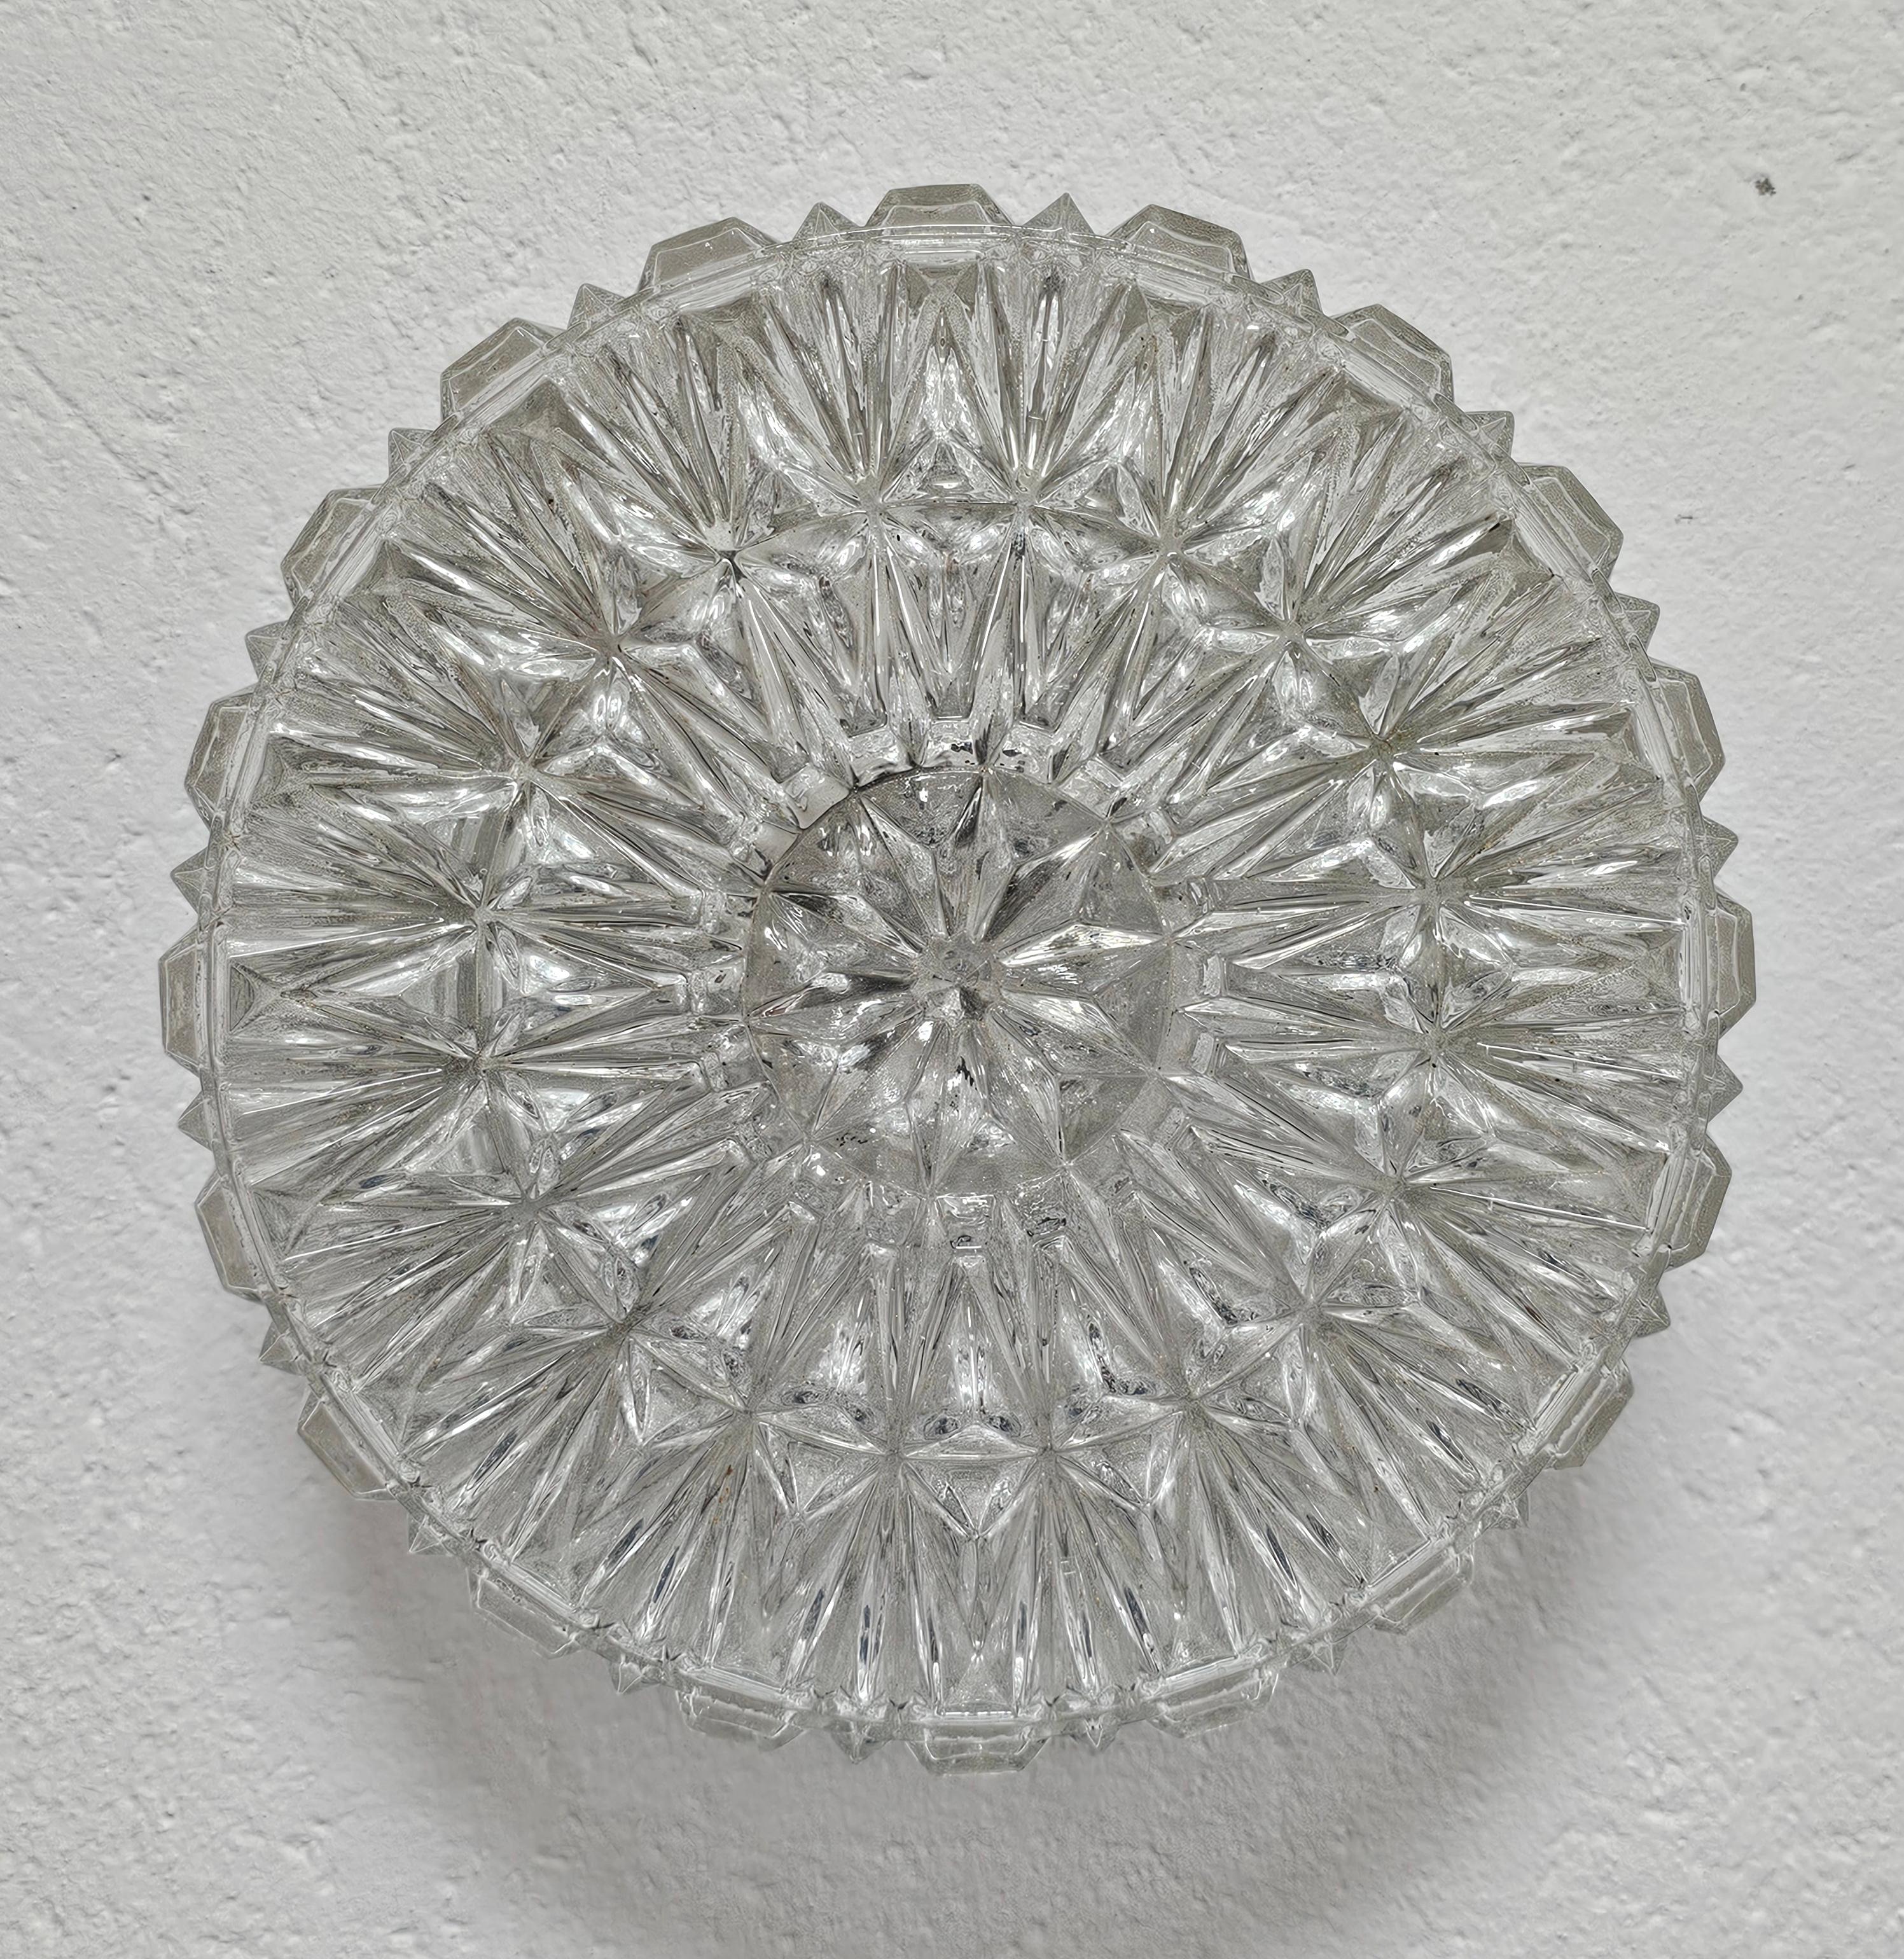 This listing presents a beautiful, large mid century modern flush mount  or sconce manufactured by ERCO. Manufacturer's label is still attached on the inside of the flush mount. It is done in thick glass with beautiful icy relief, reminding us of a